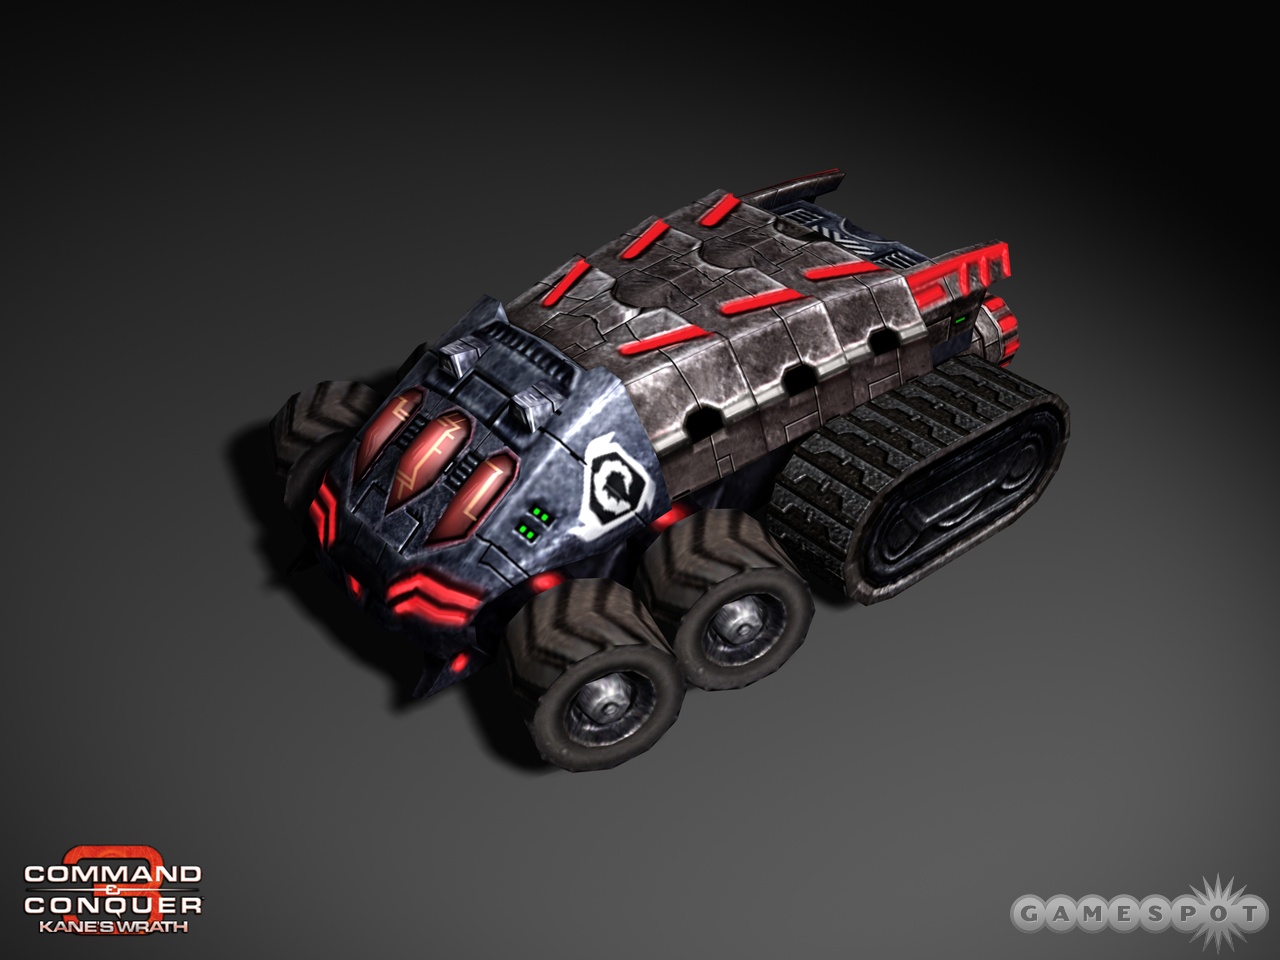 The Nod Reckoner is a personnel carrier that acts as a forward bunker.